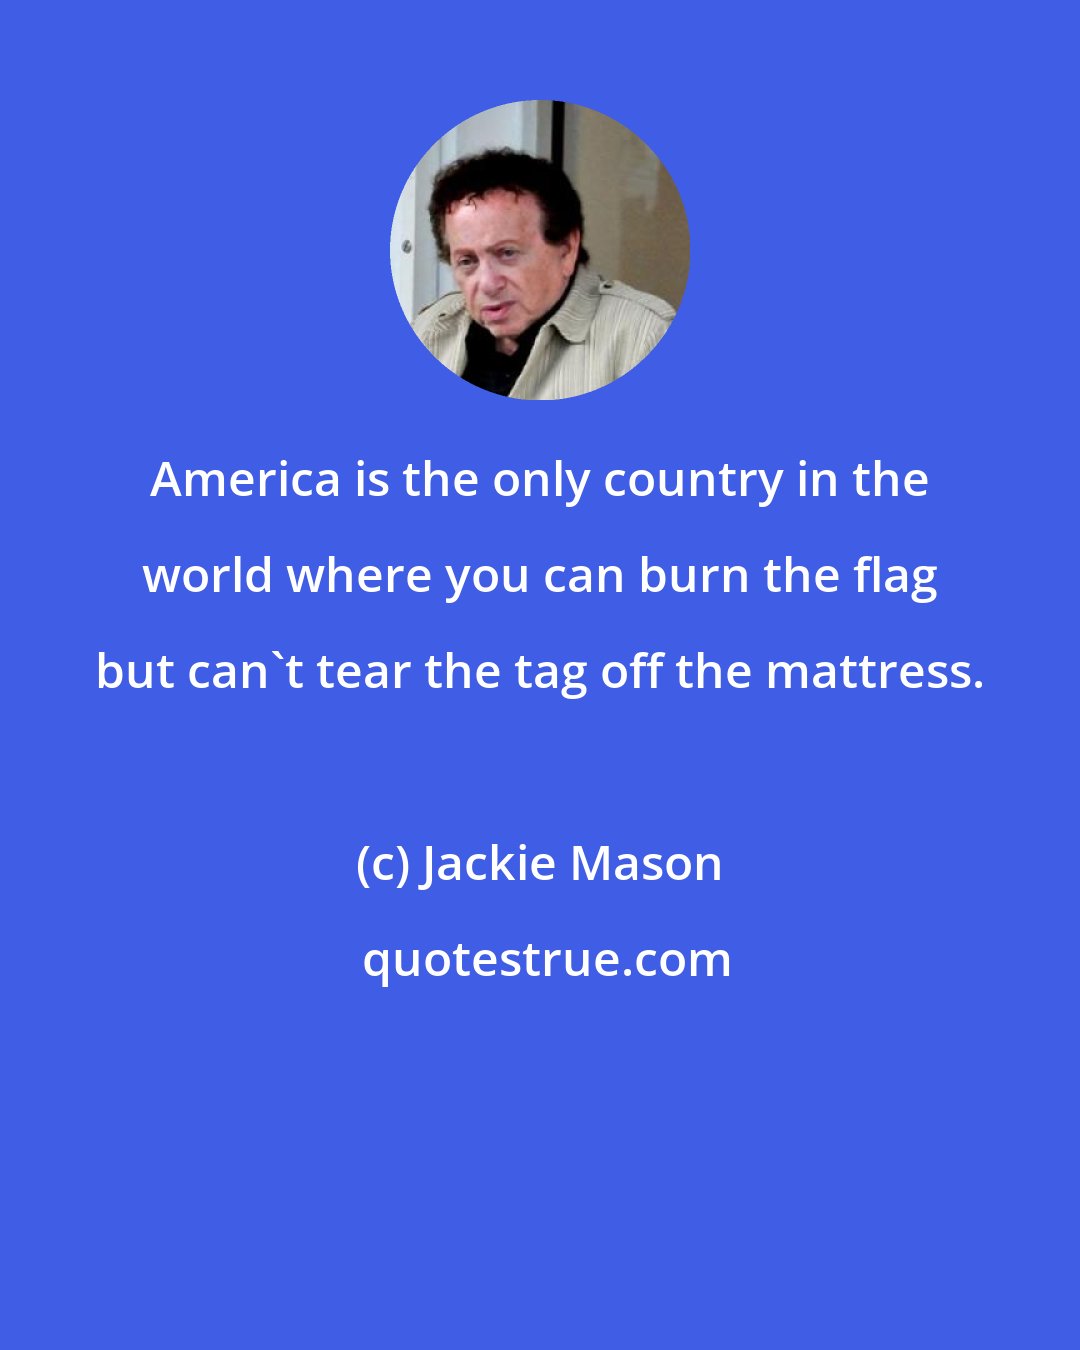 Jackie Mason: America is the only country in the world where you can burn the flag but can't tear the tag off the mattress.